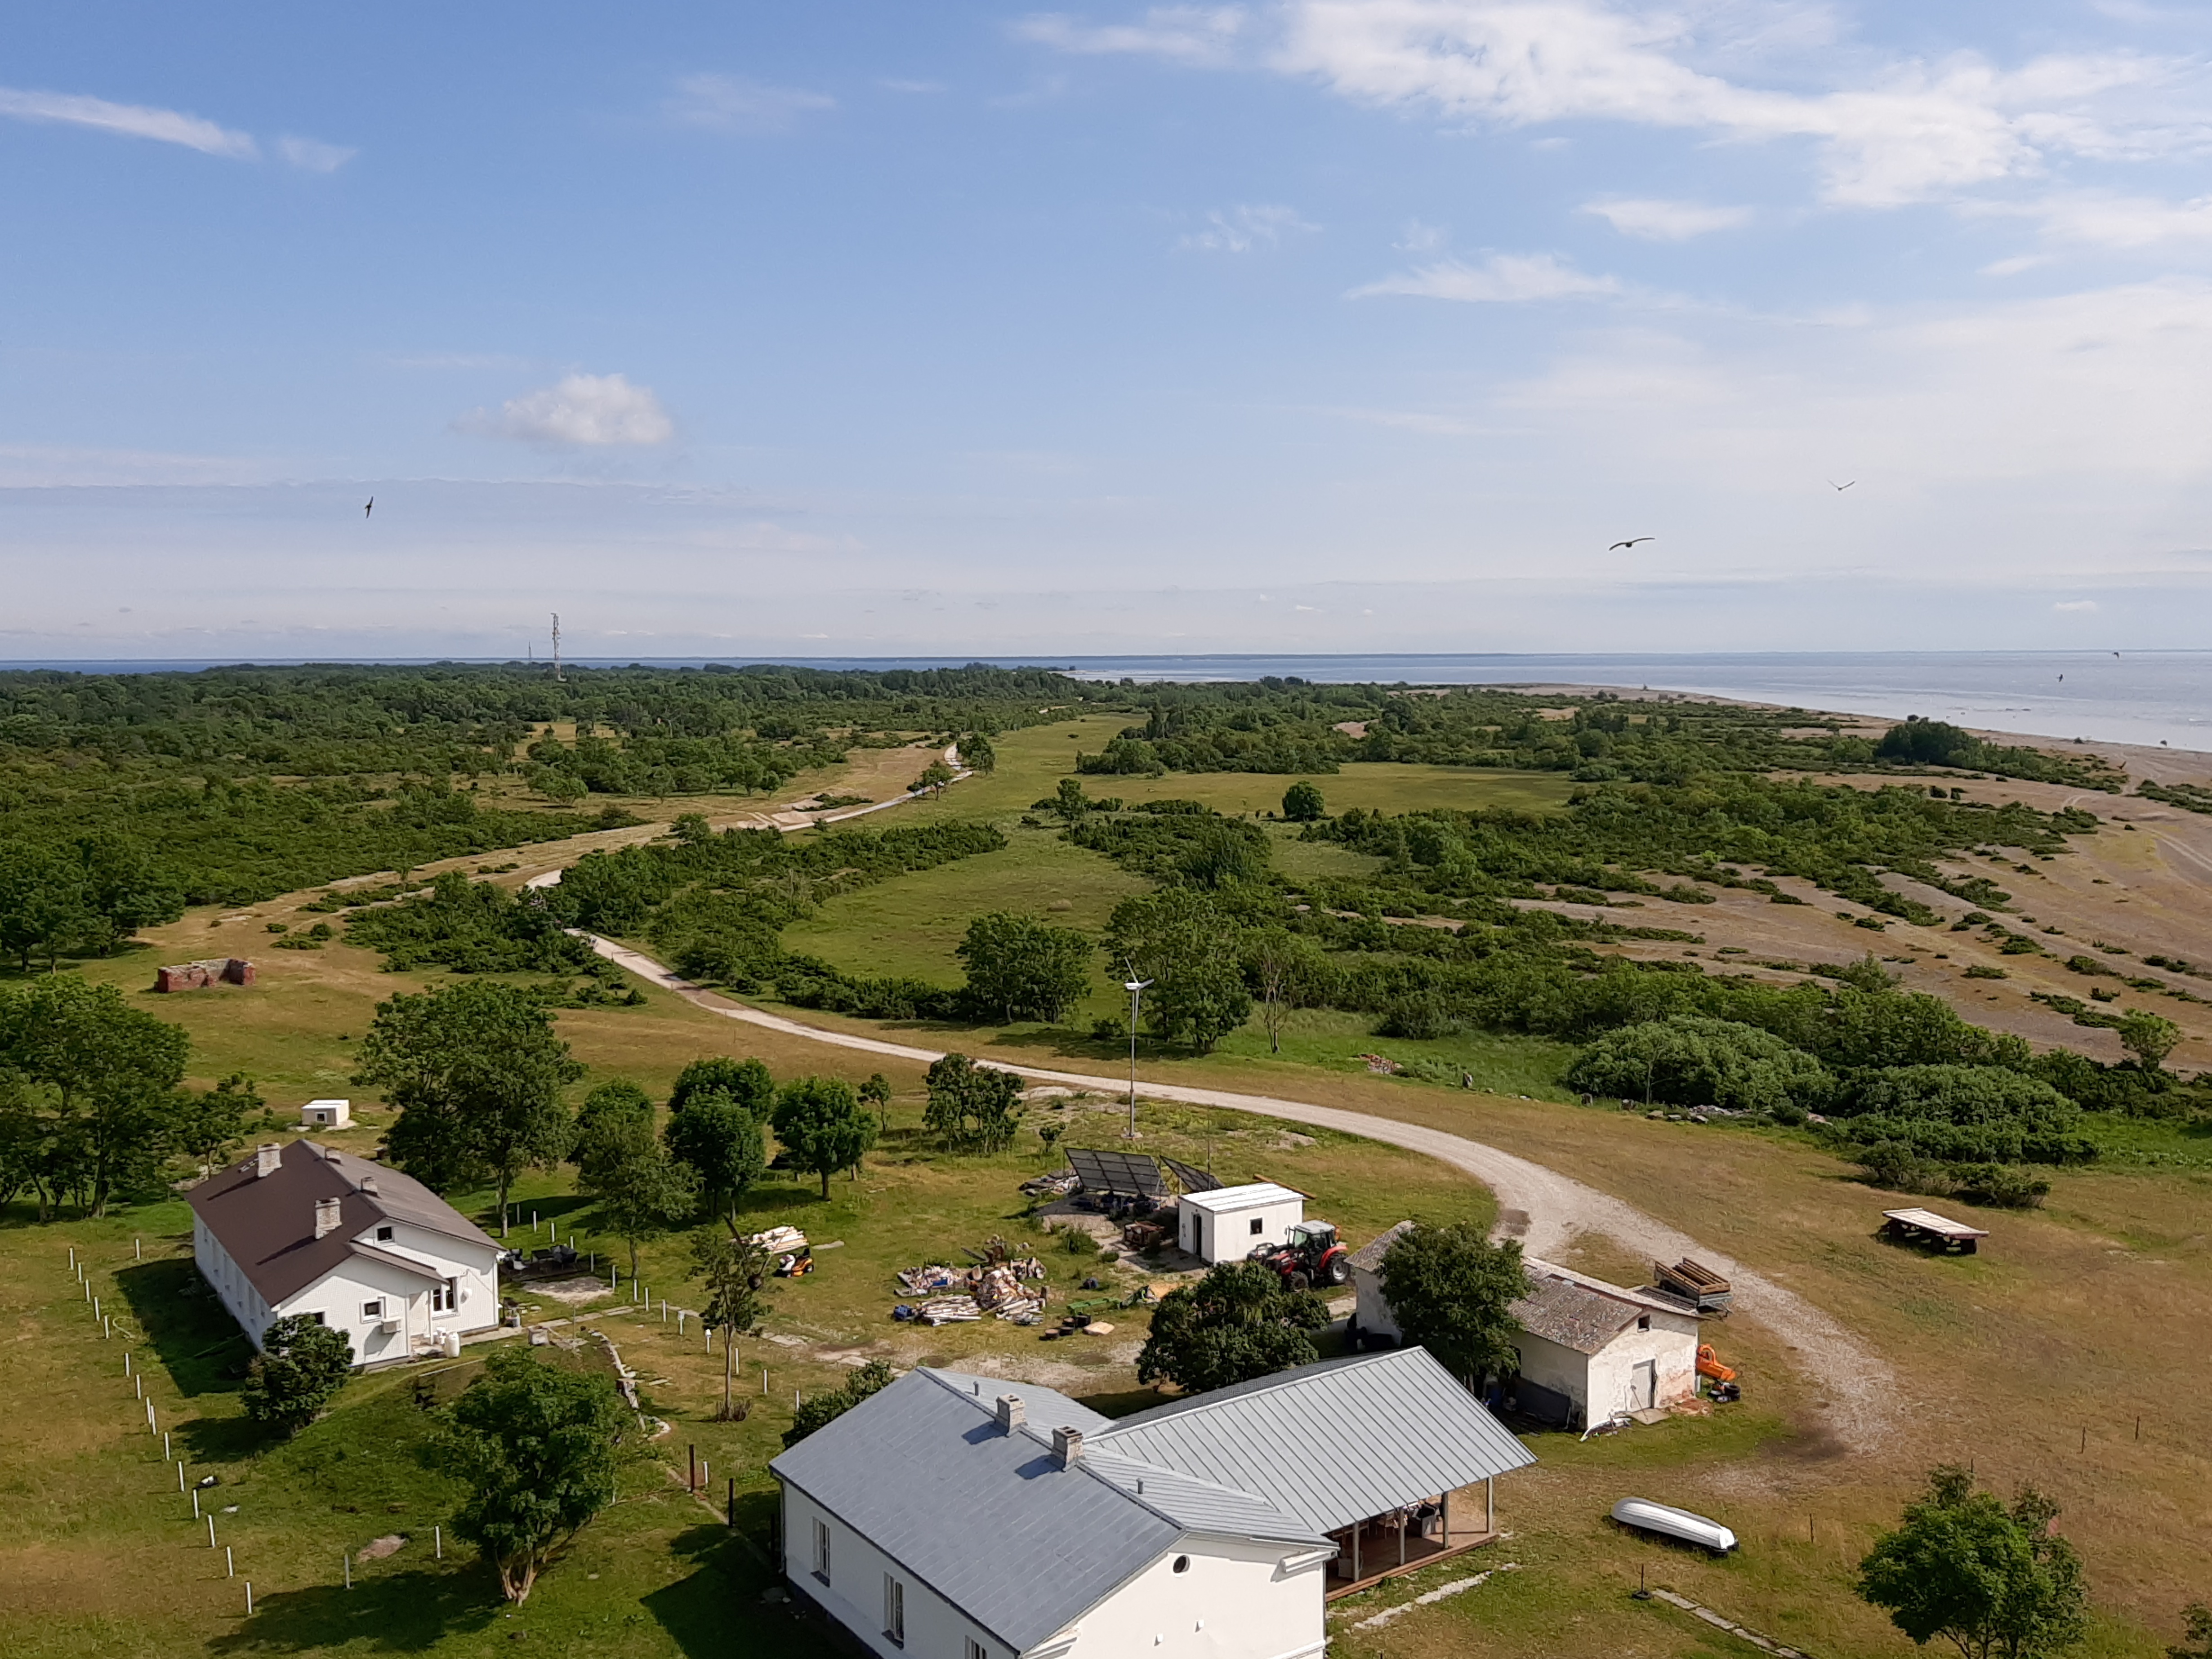 View Osmussaare from fire tower rephoto